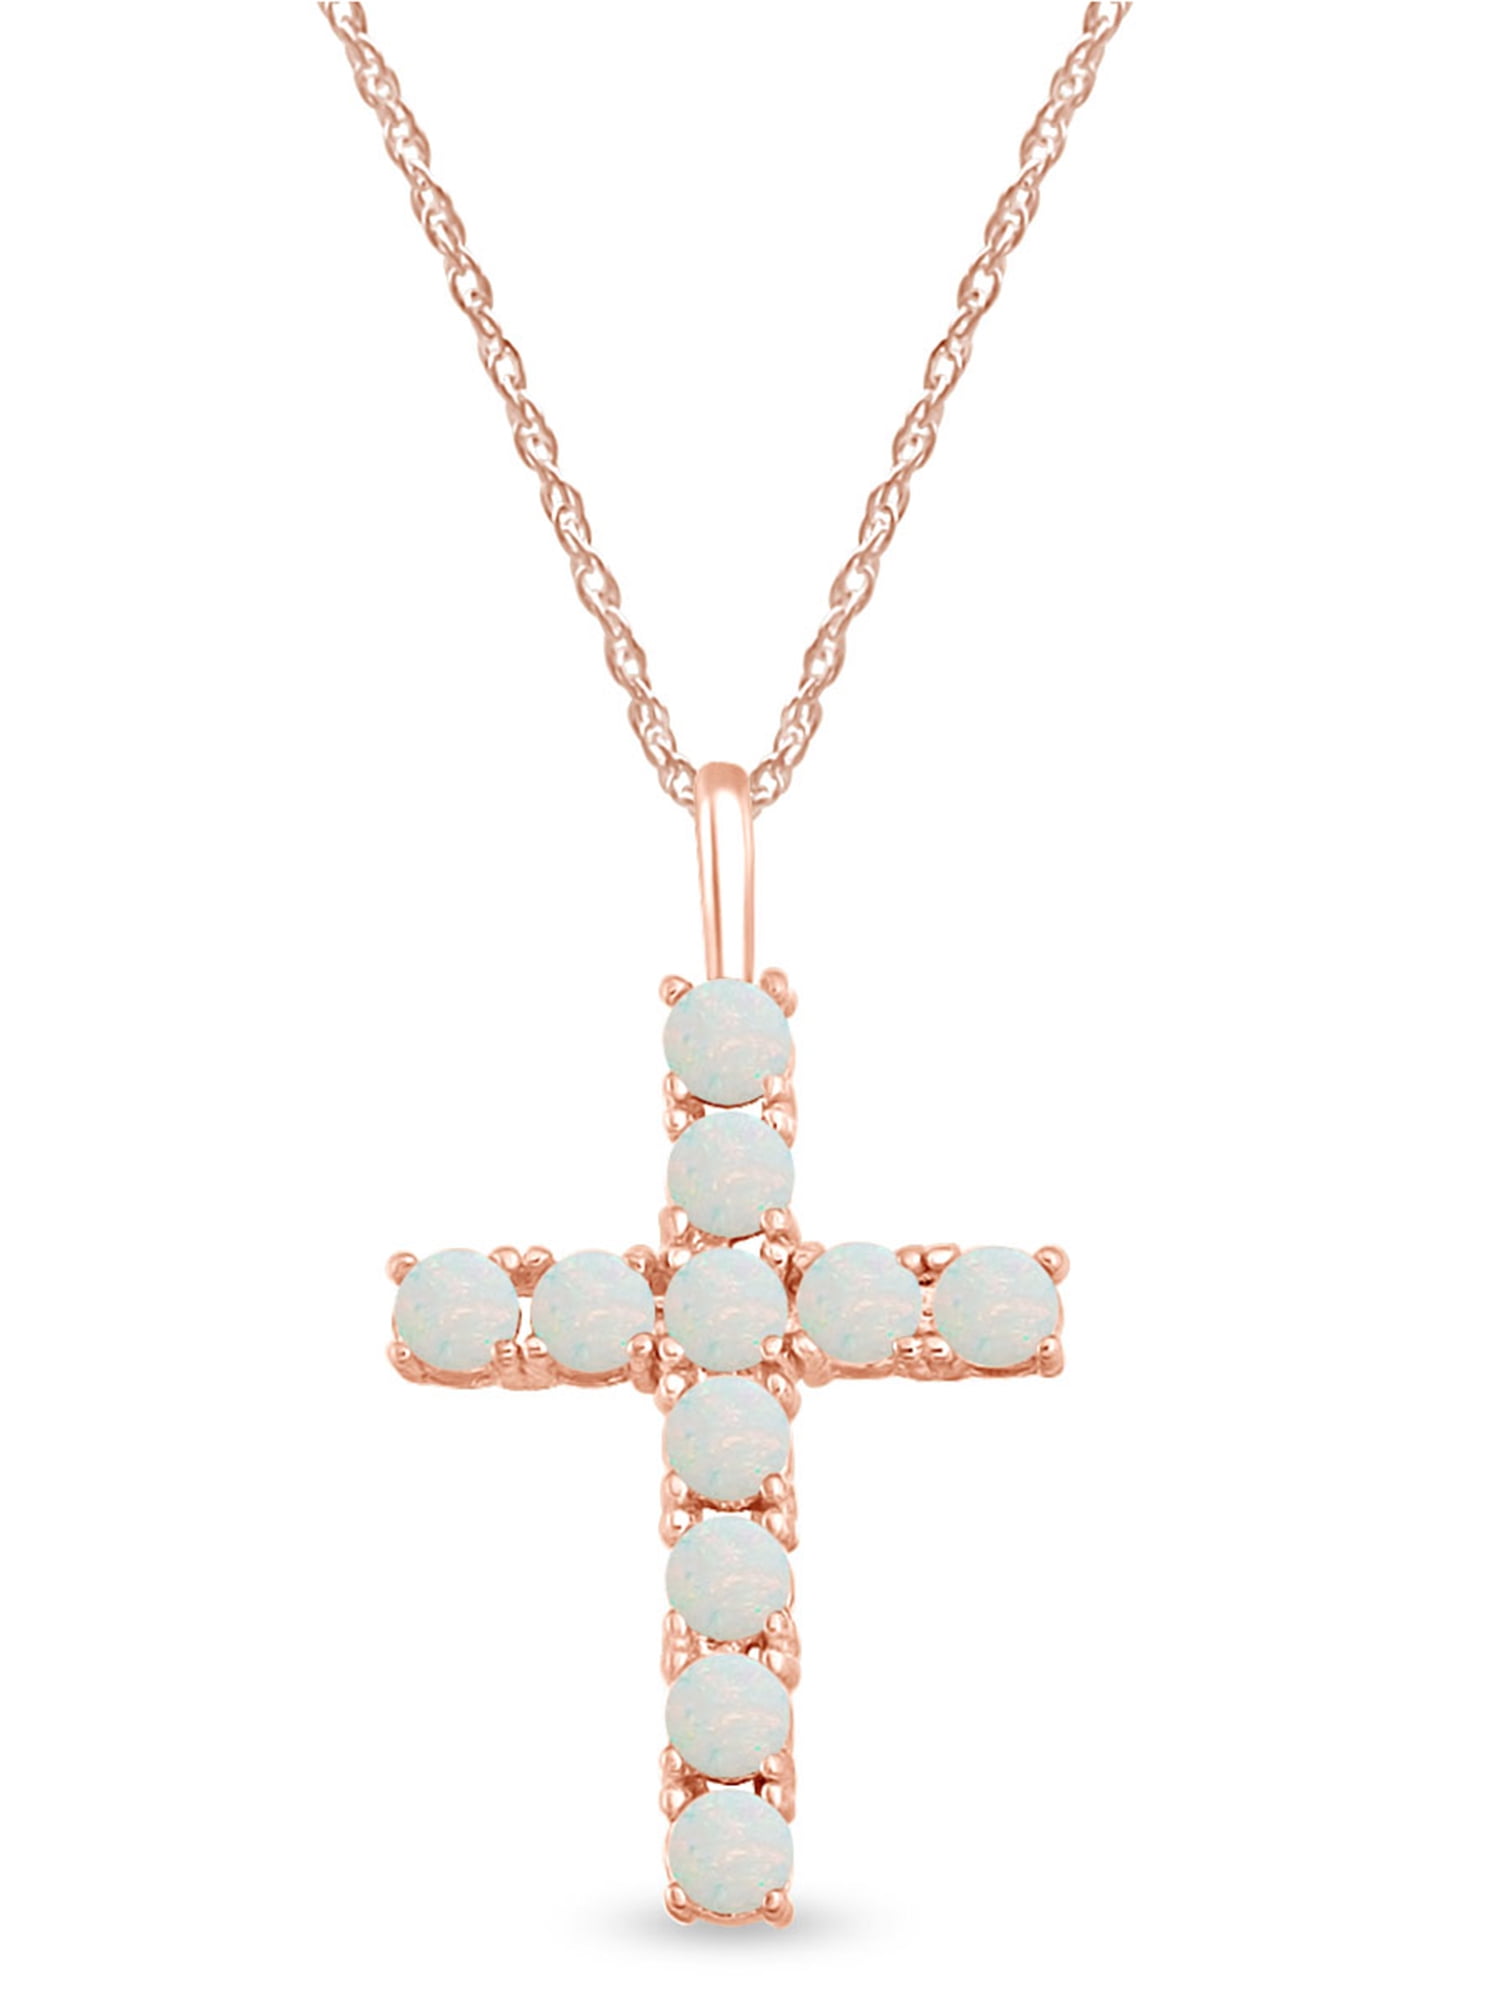 AFFY Infinity Cross Pendant Necklace in 14k Gold Over Sterling Silver Round Cut White Cubic Zirconia 